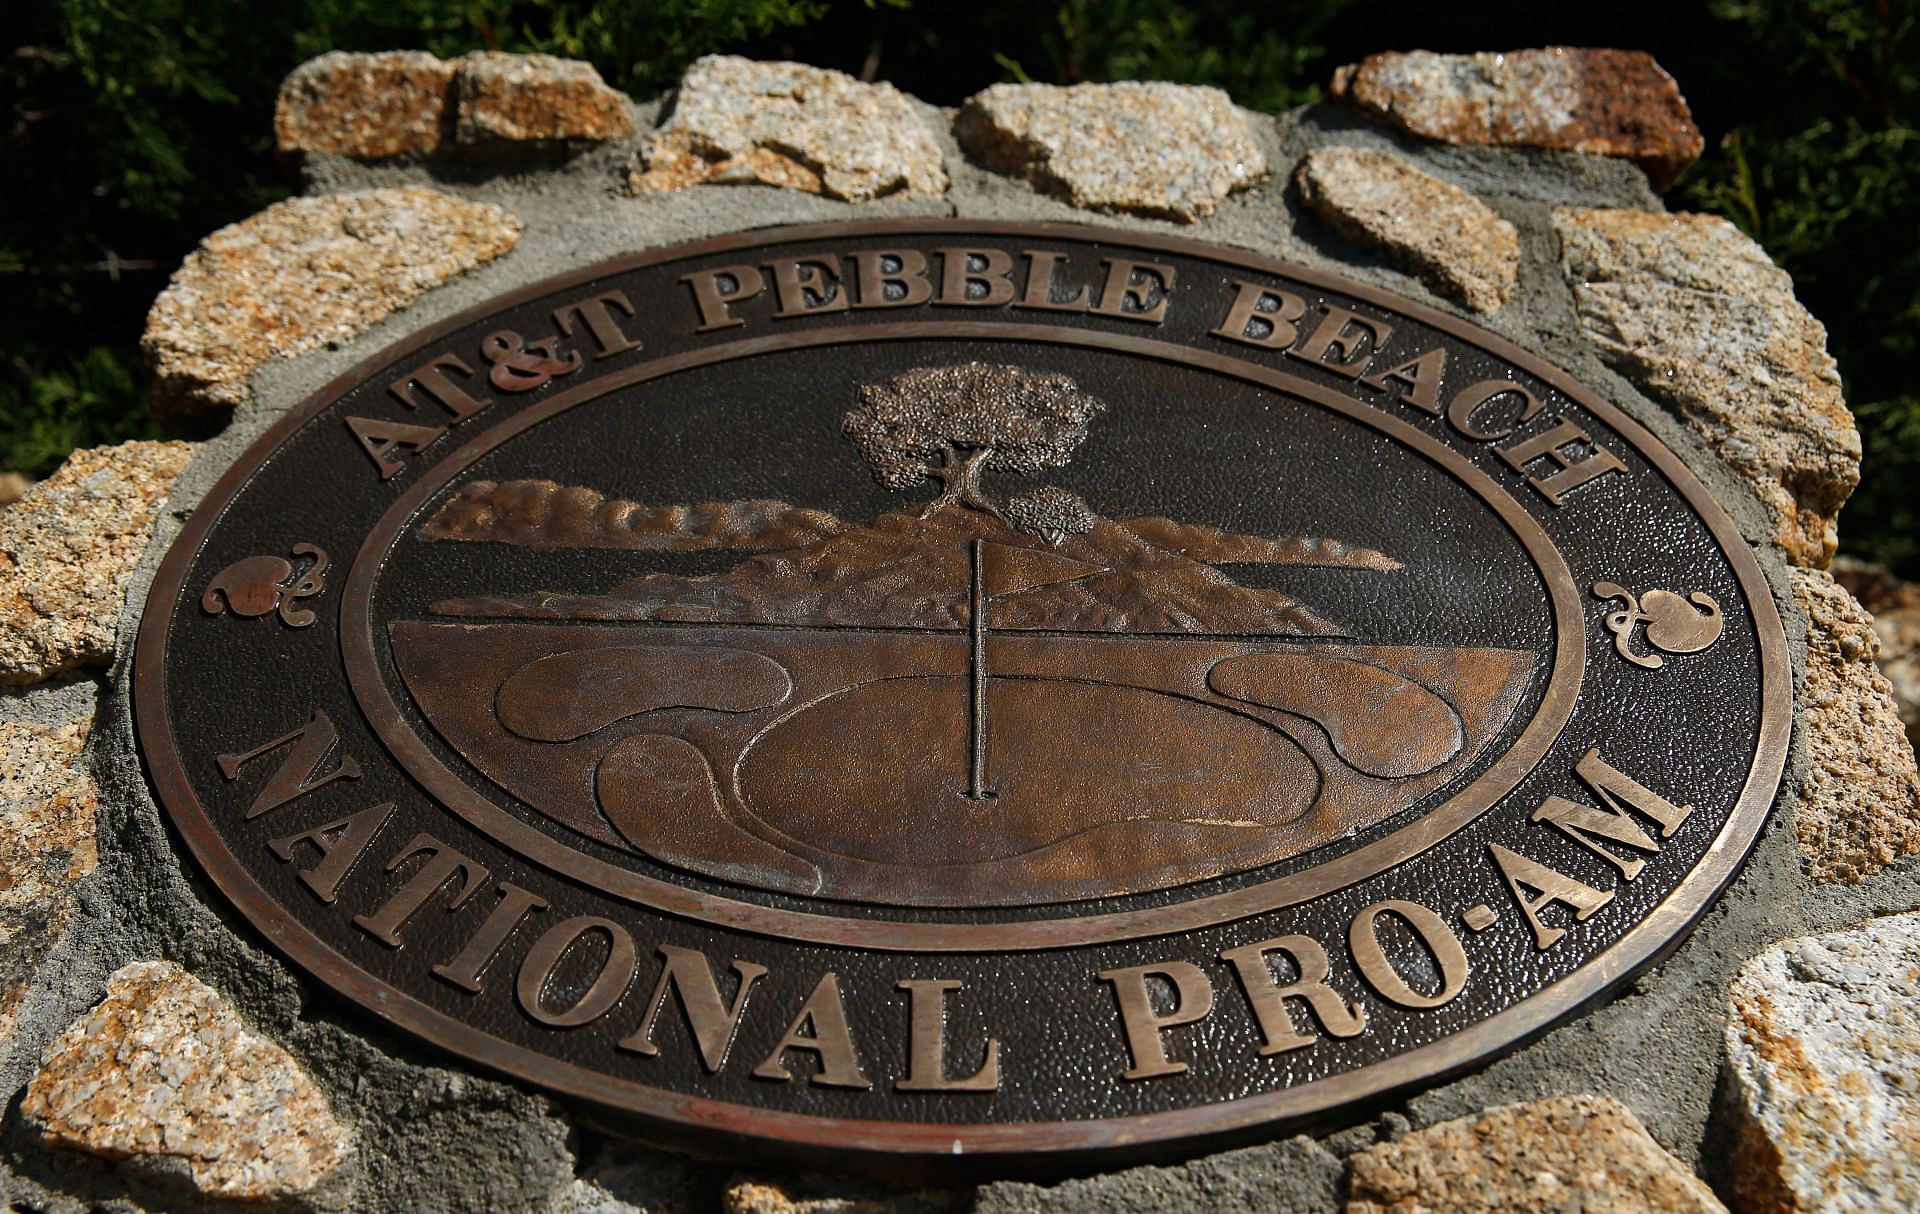 AT&amp;T Pebble Beach National Pro-Am - Preview Day 3